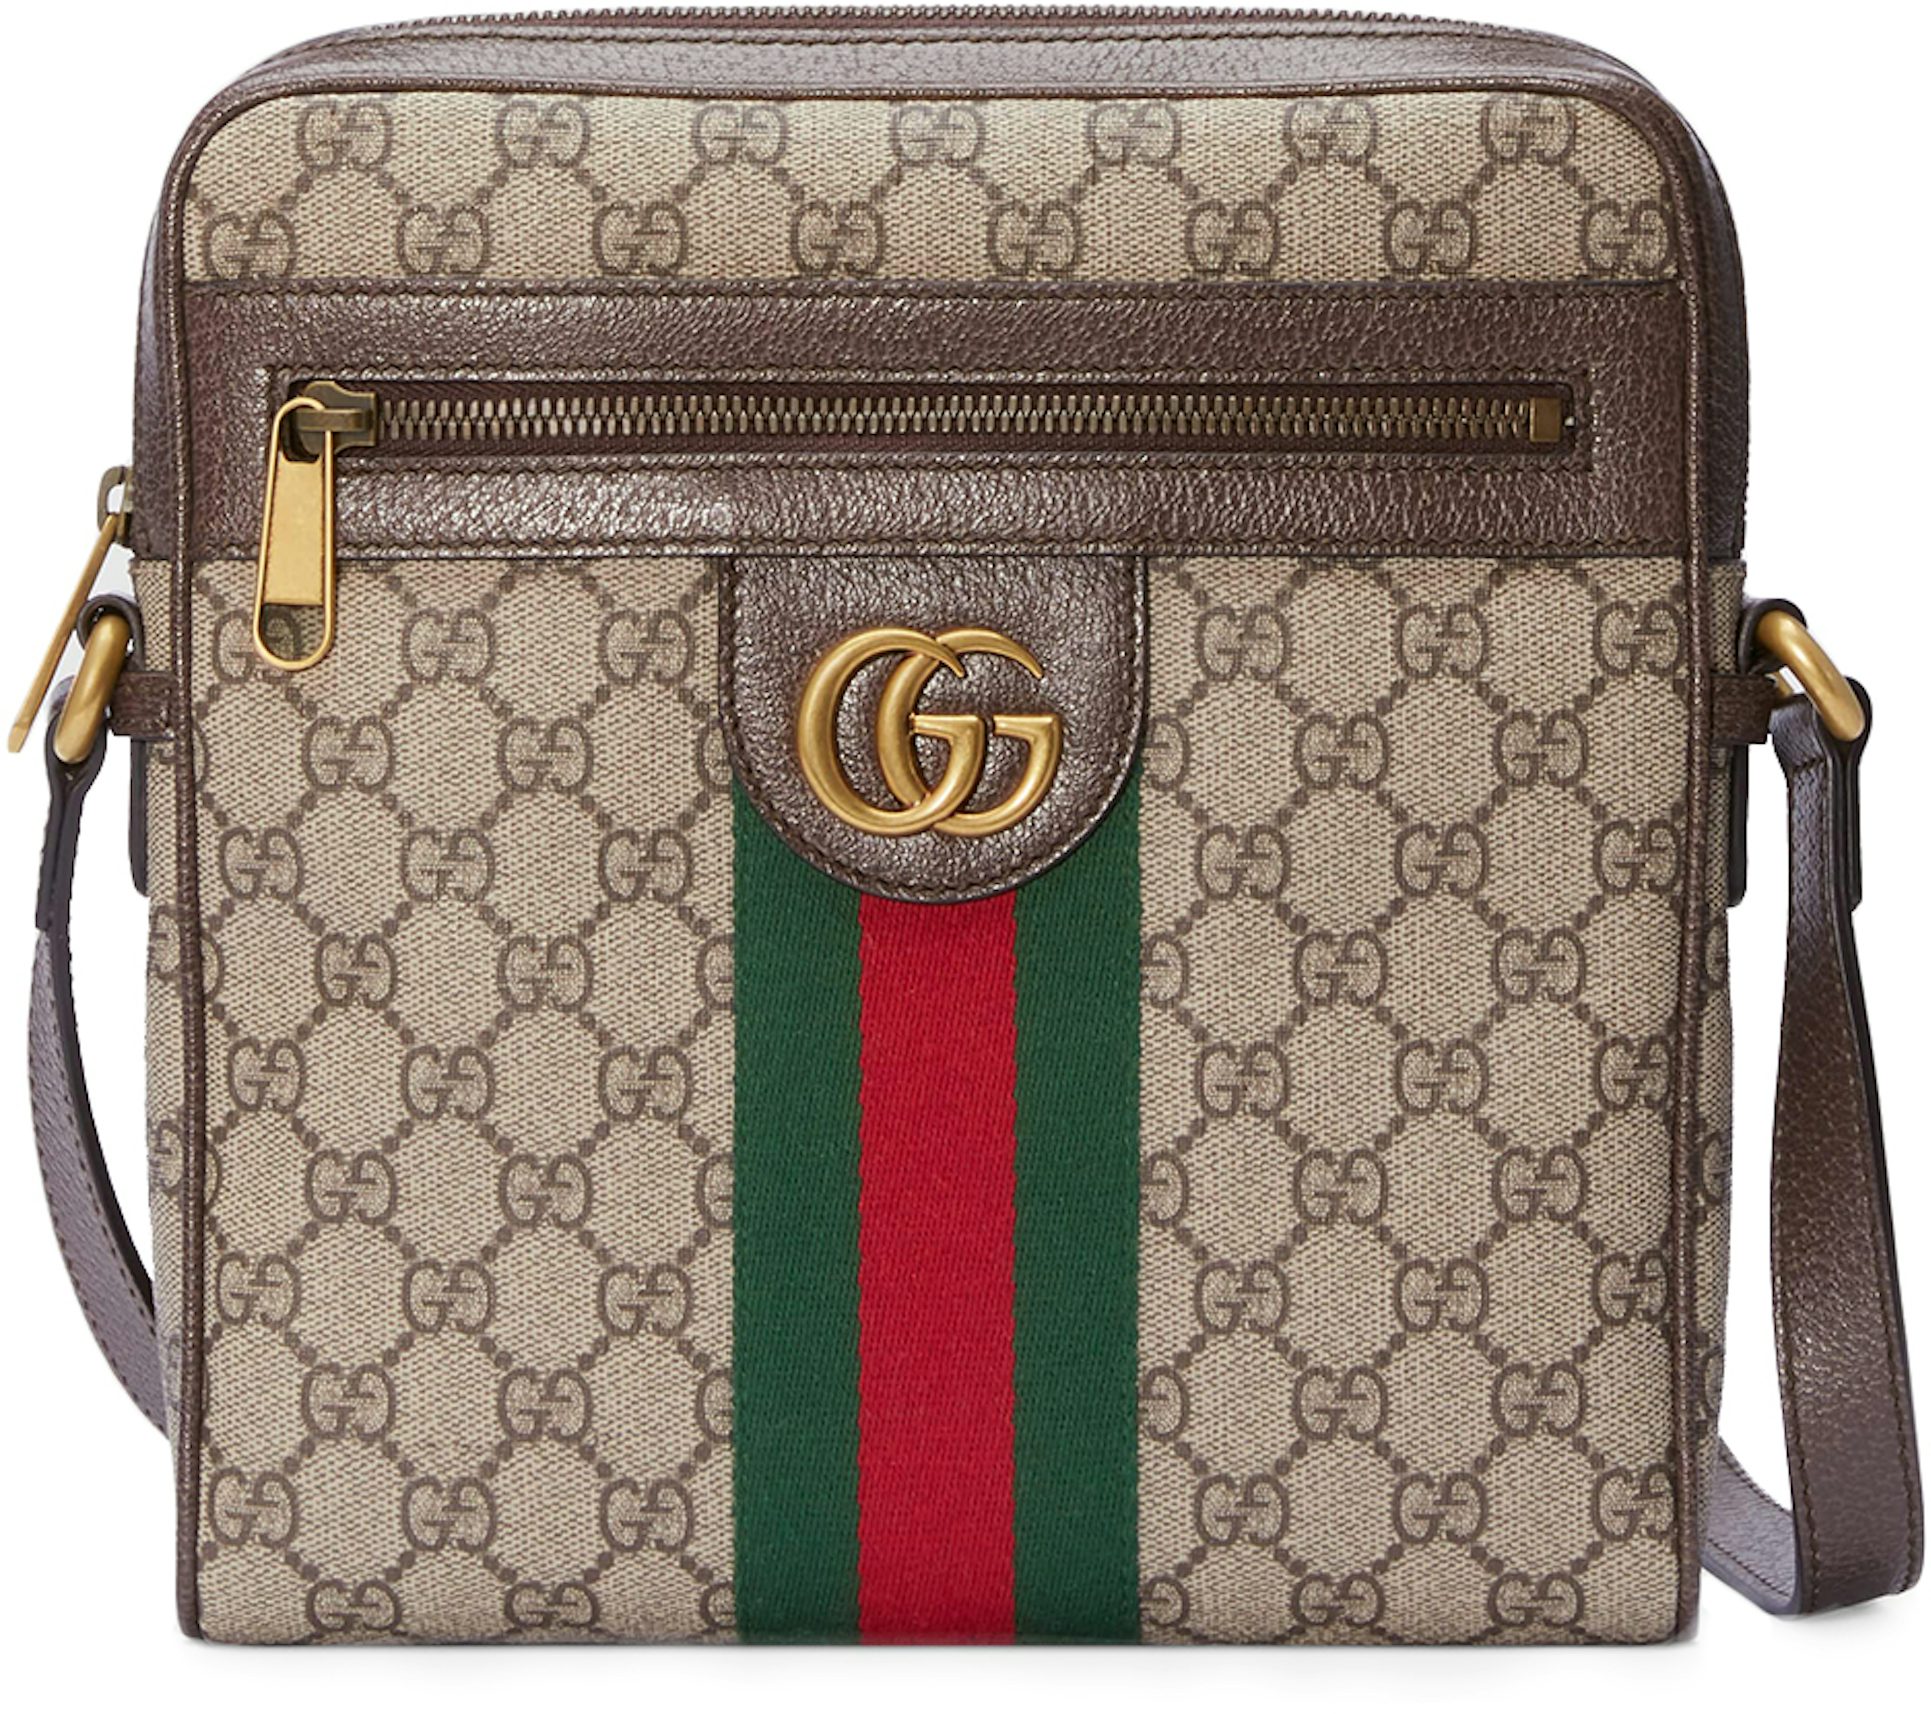 Gucci Men's Ophidia Leather-trimmed Tote Bag